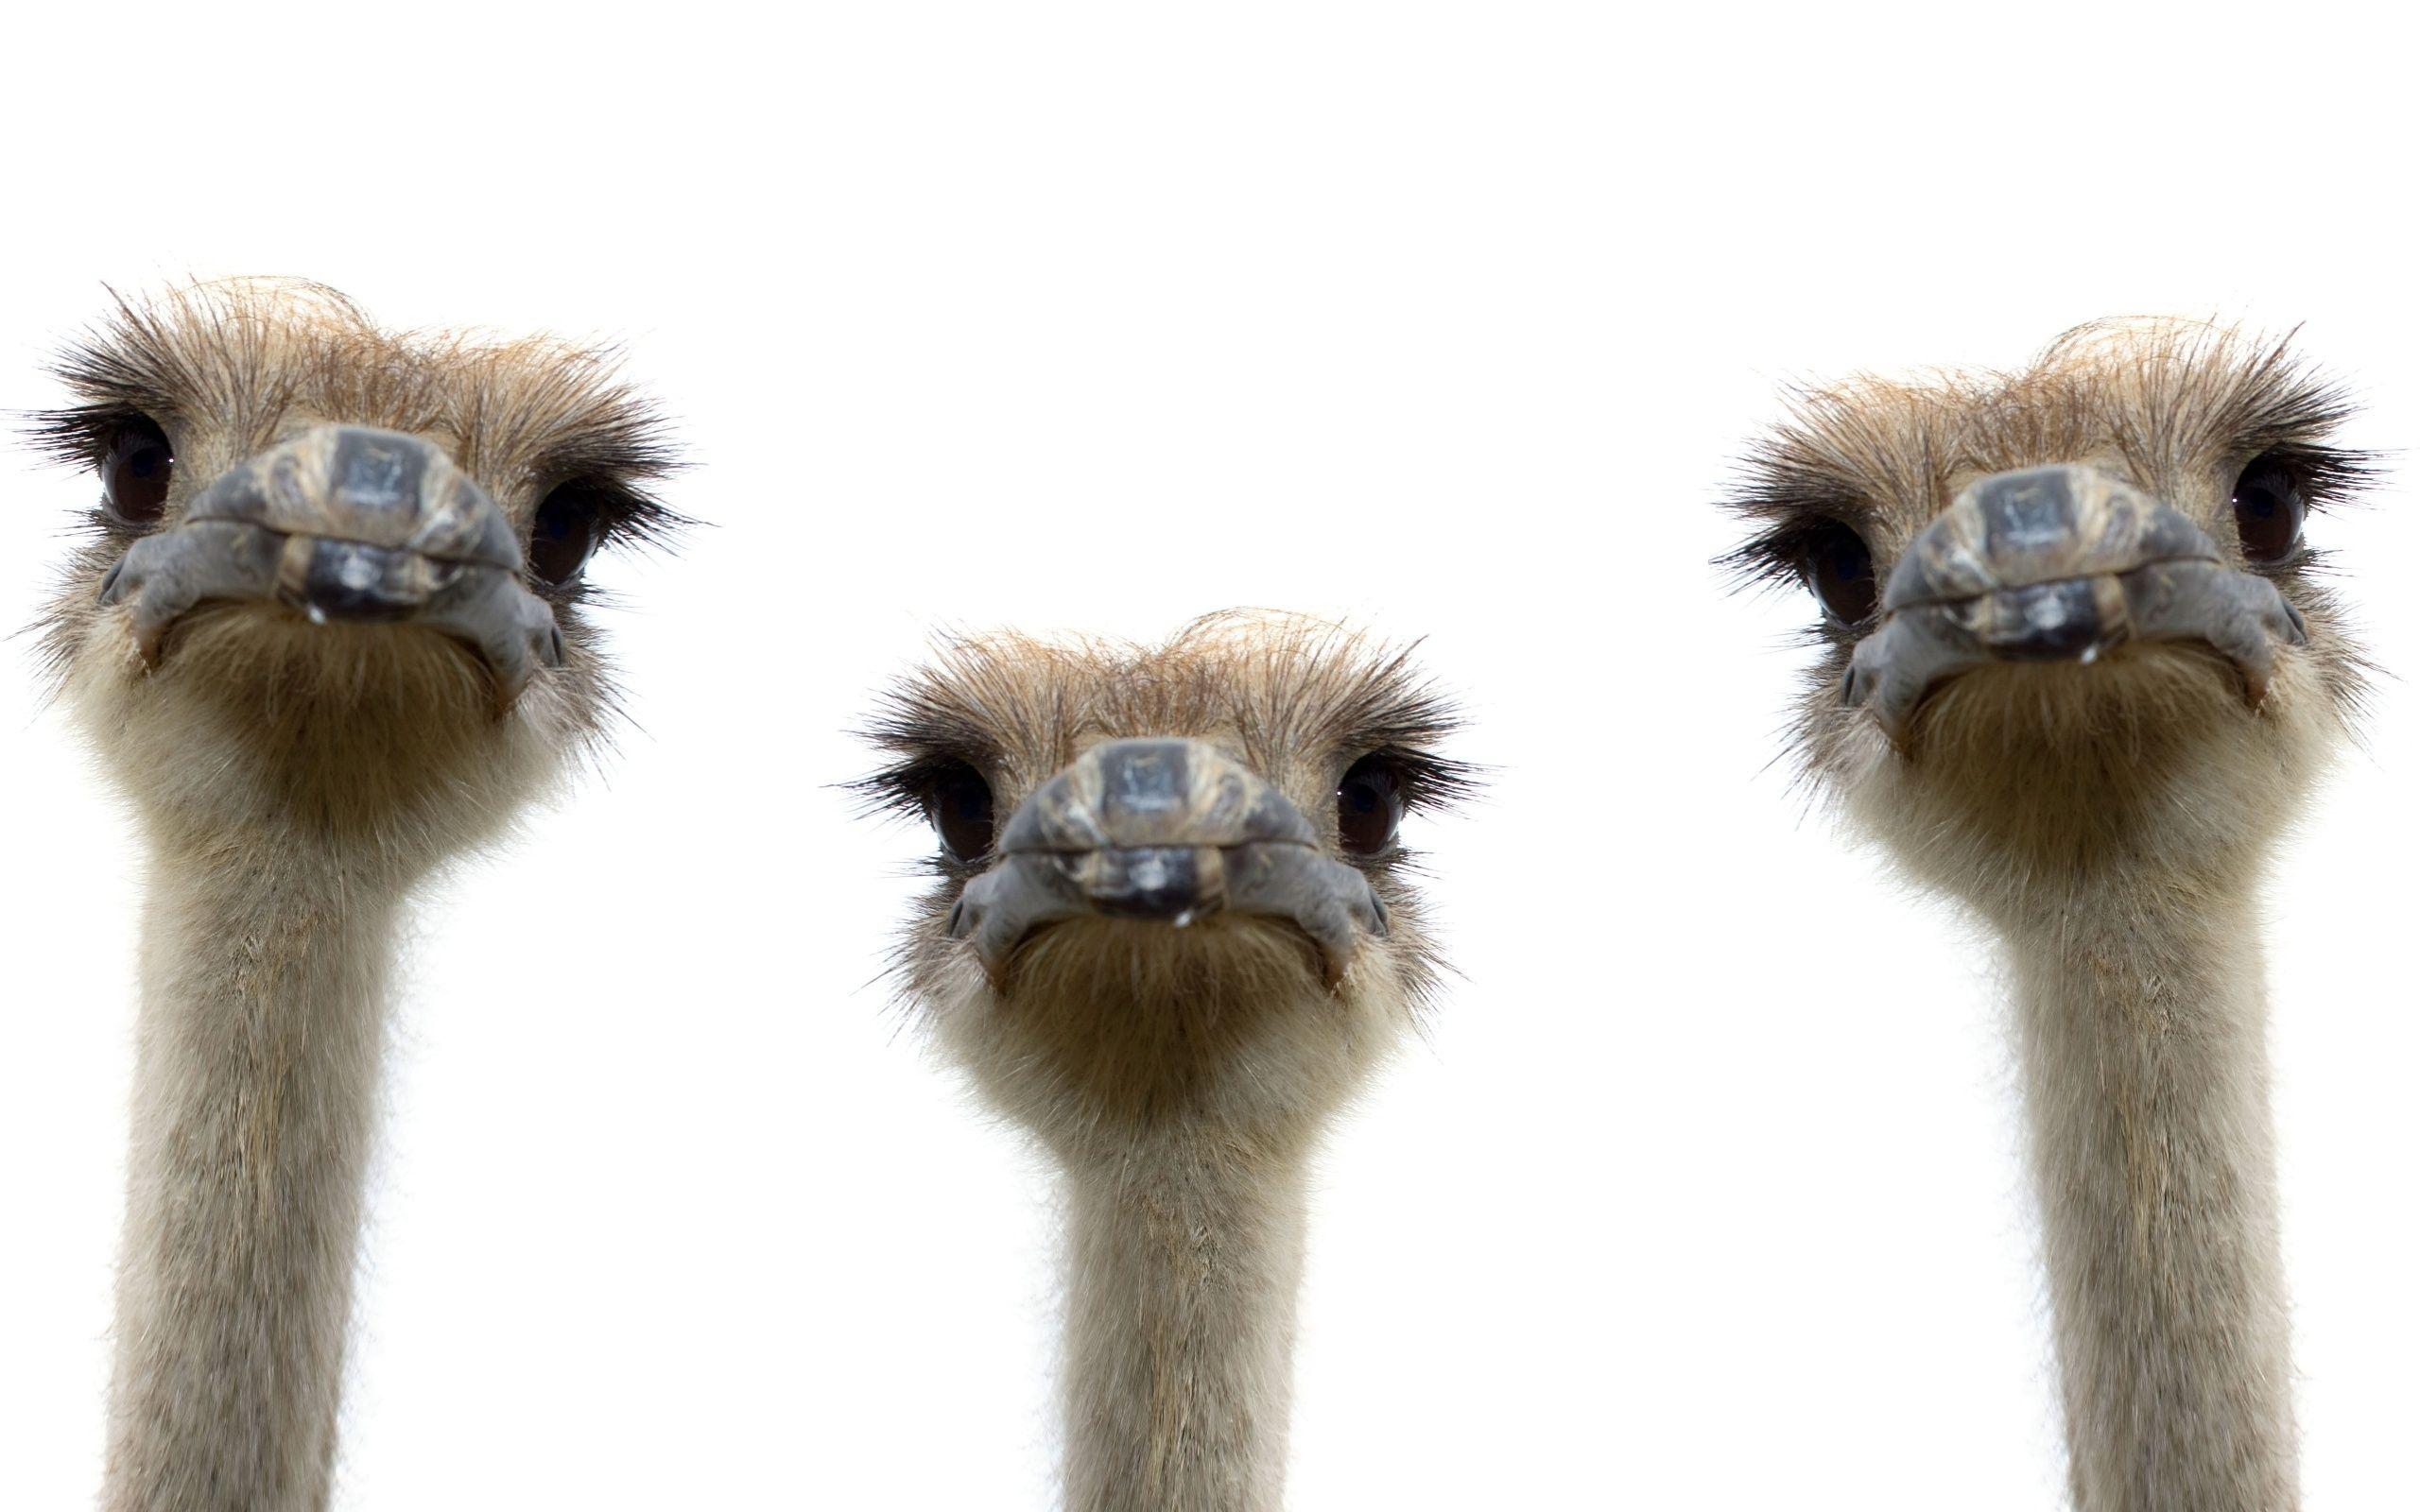 Photo of ostriches